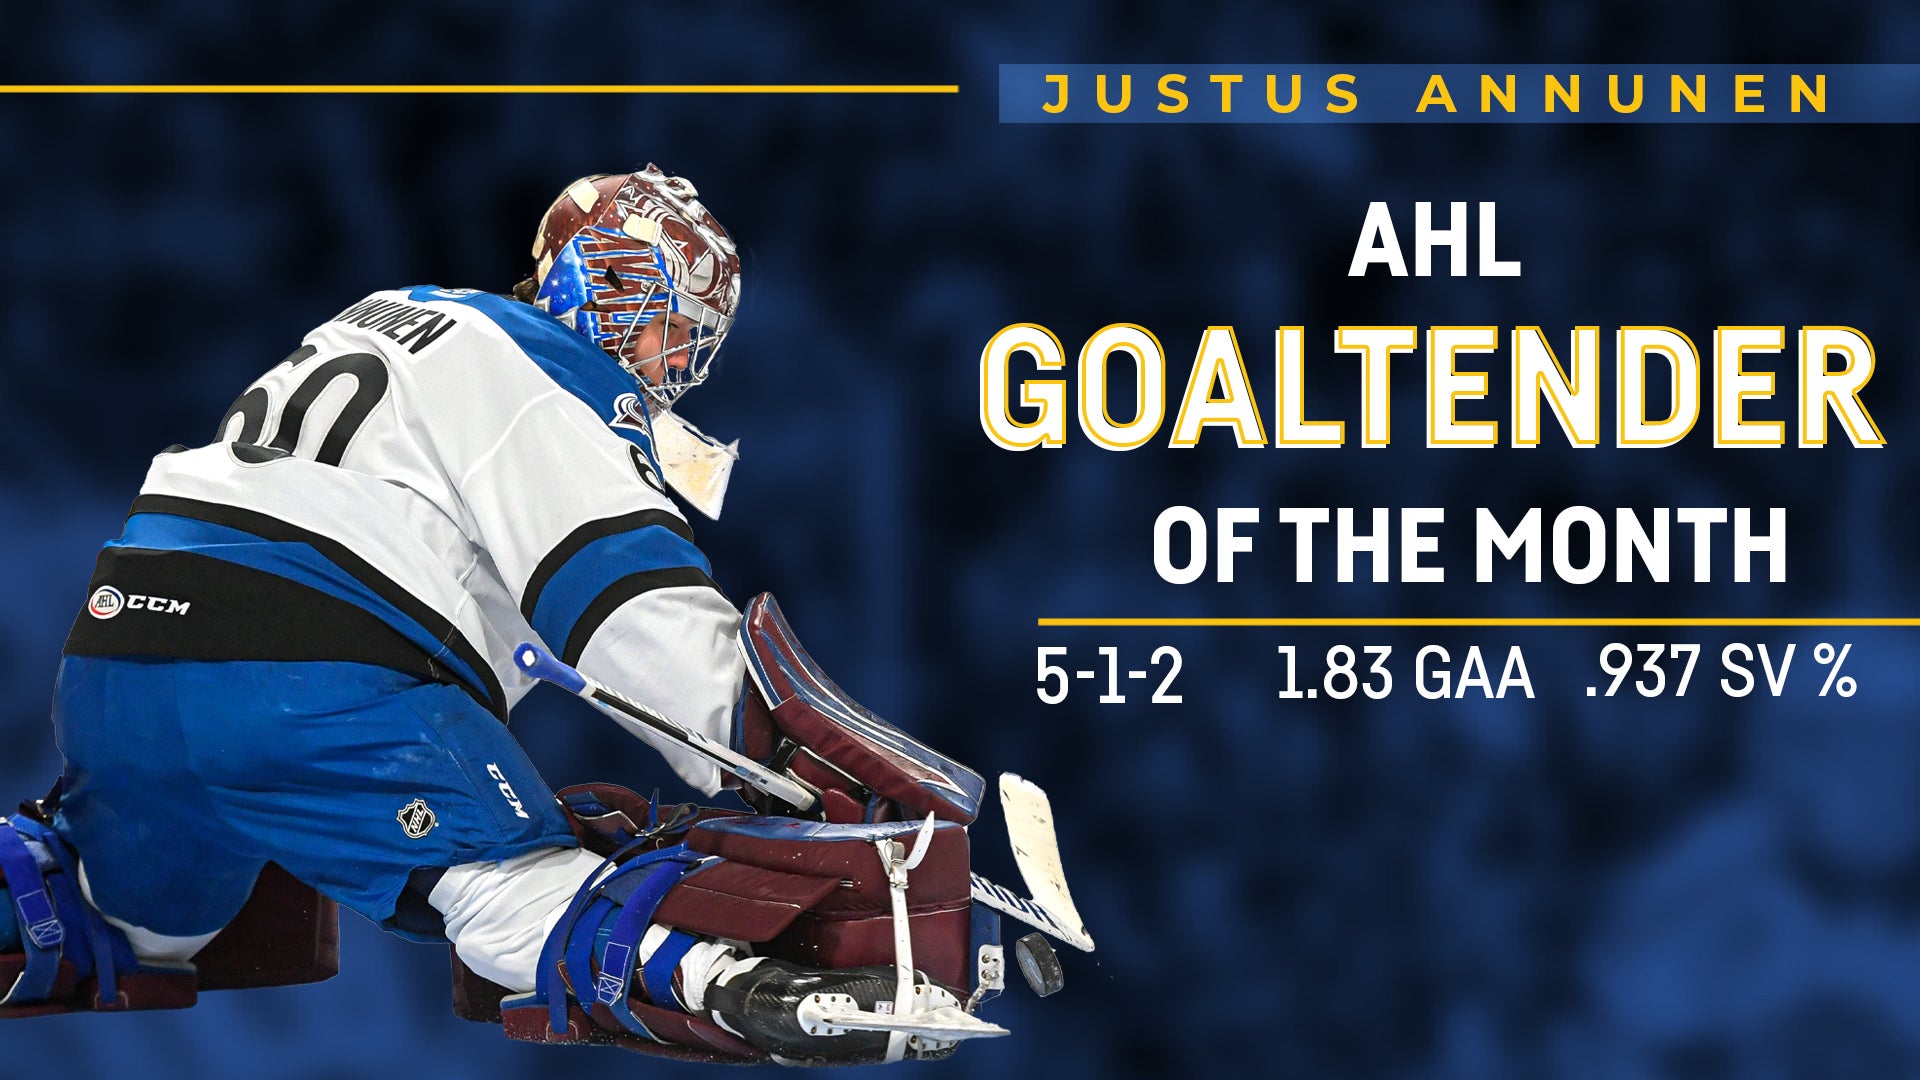 An opportunity awaits for young Avs goalie Justus Annunen: “I know